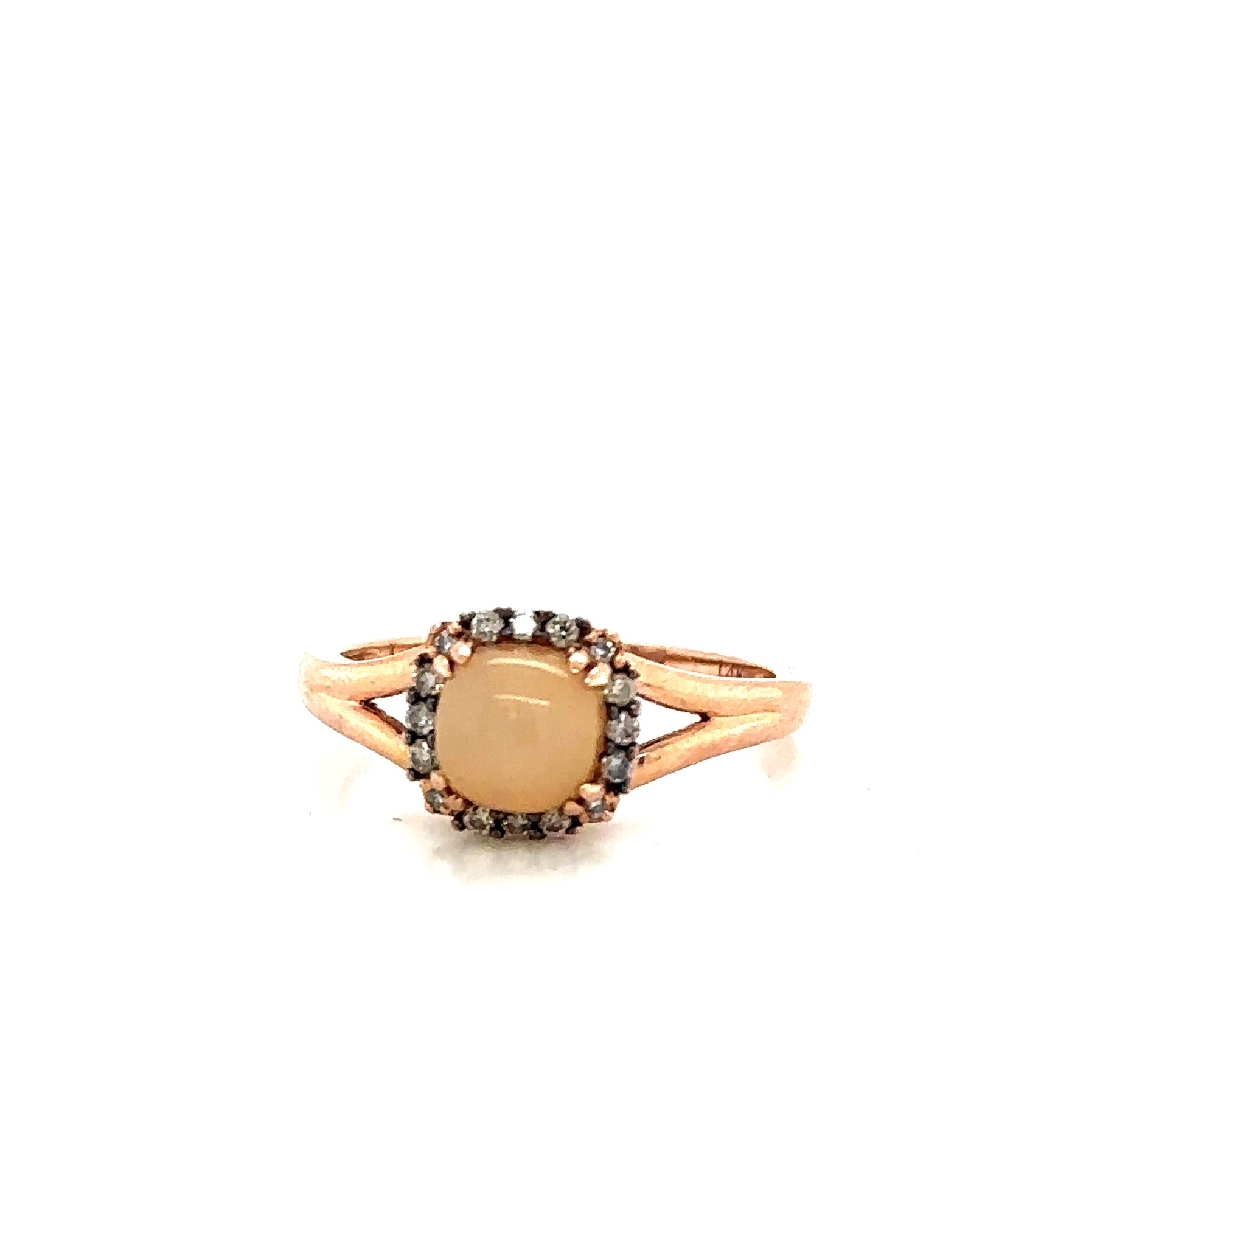 14K Rose Gold Levian Opal Ring With Diamond Halo

Size 7